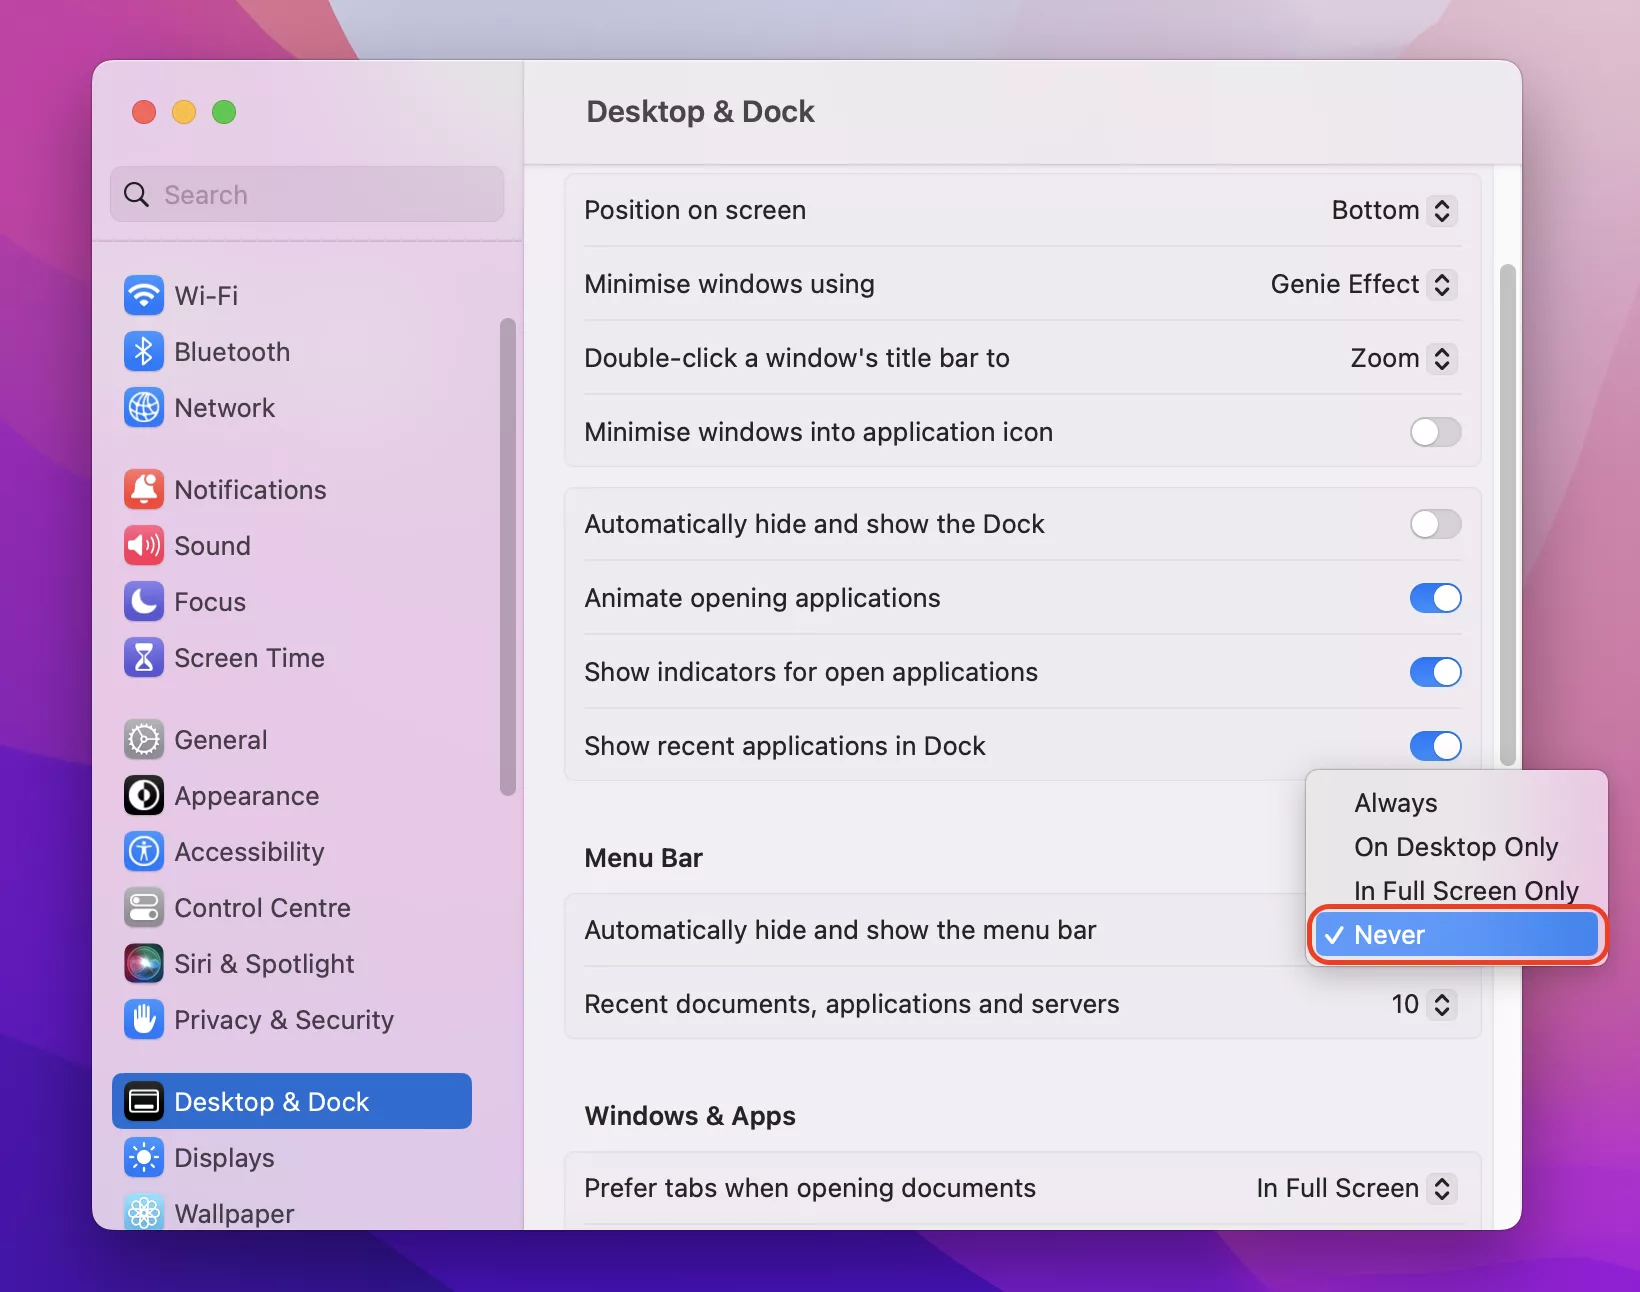 How to automatically hide (and show) the Dock on Mac